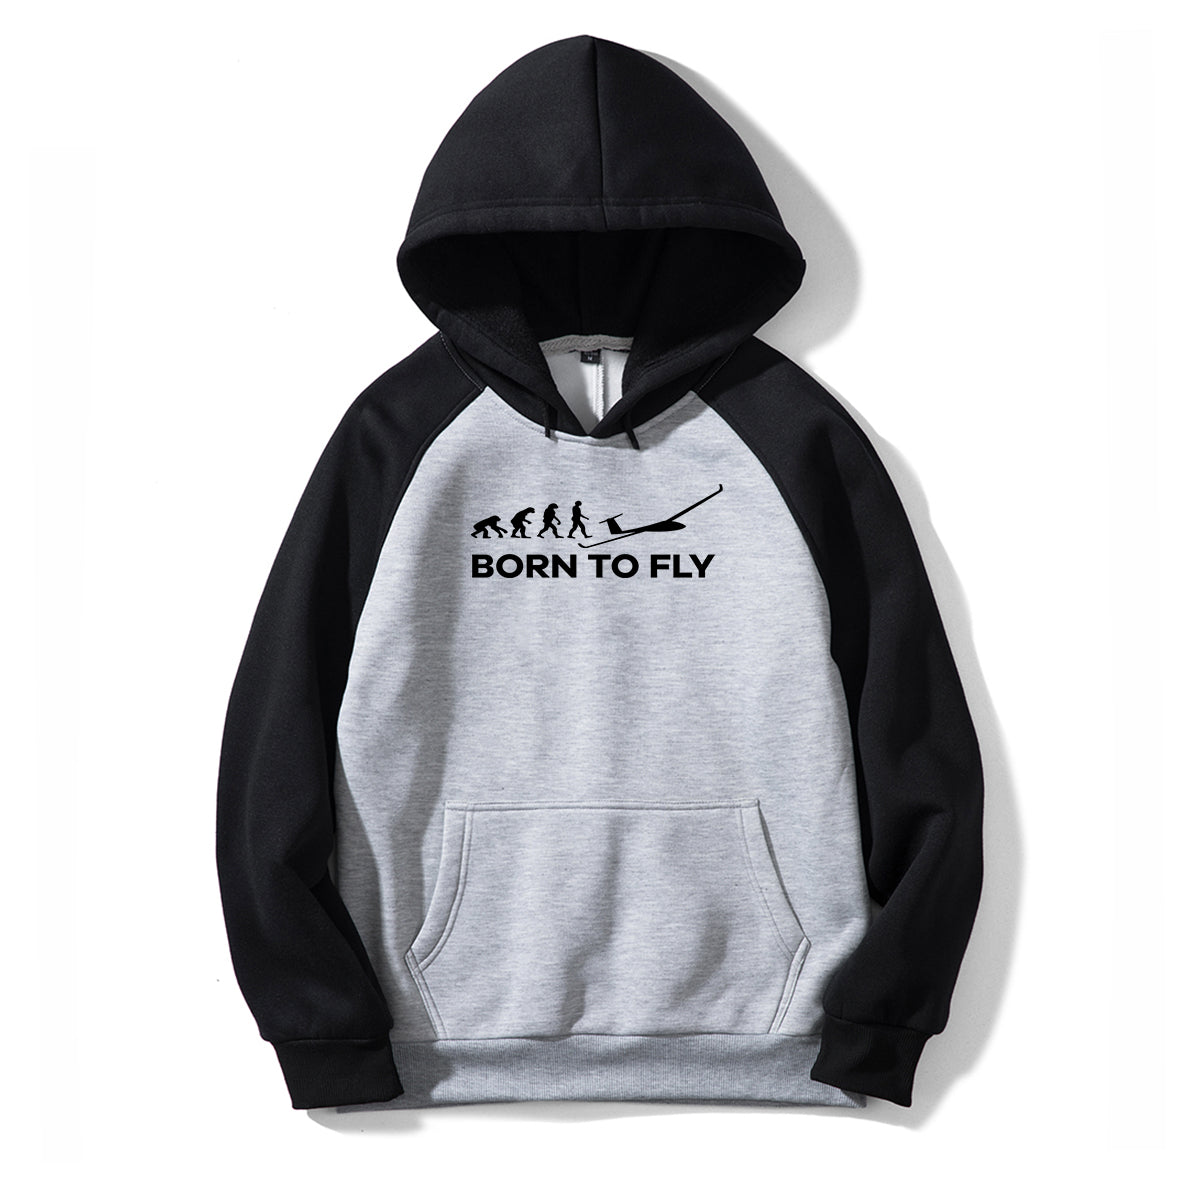 Born To Fly Glider Designed Colourful Hoodies